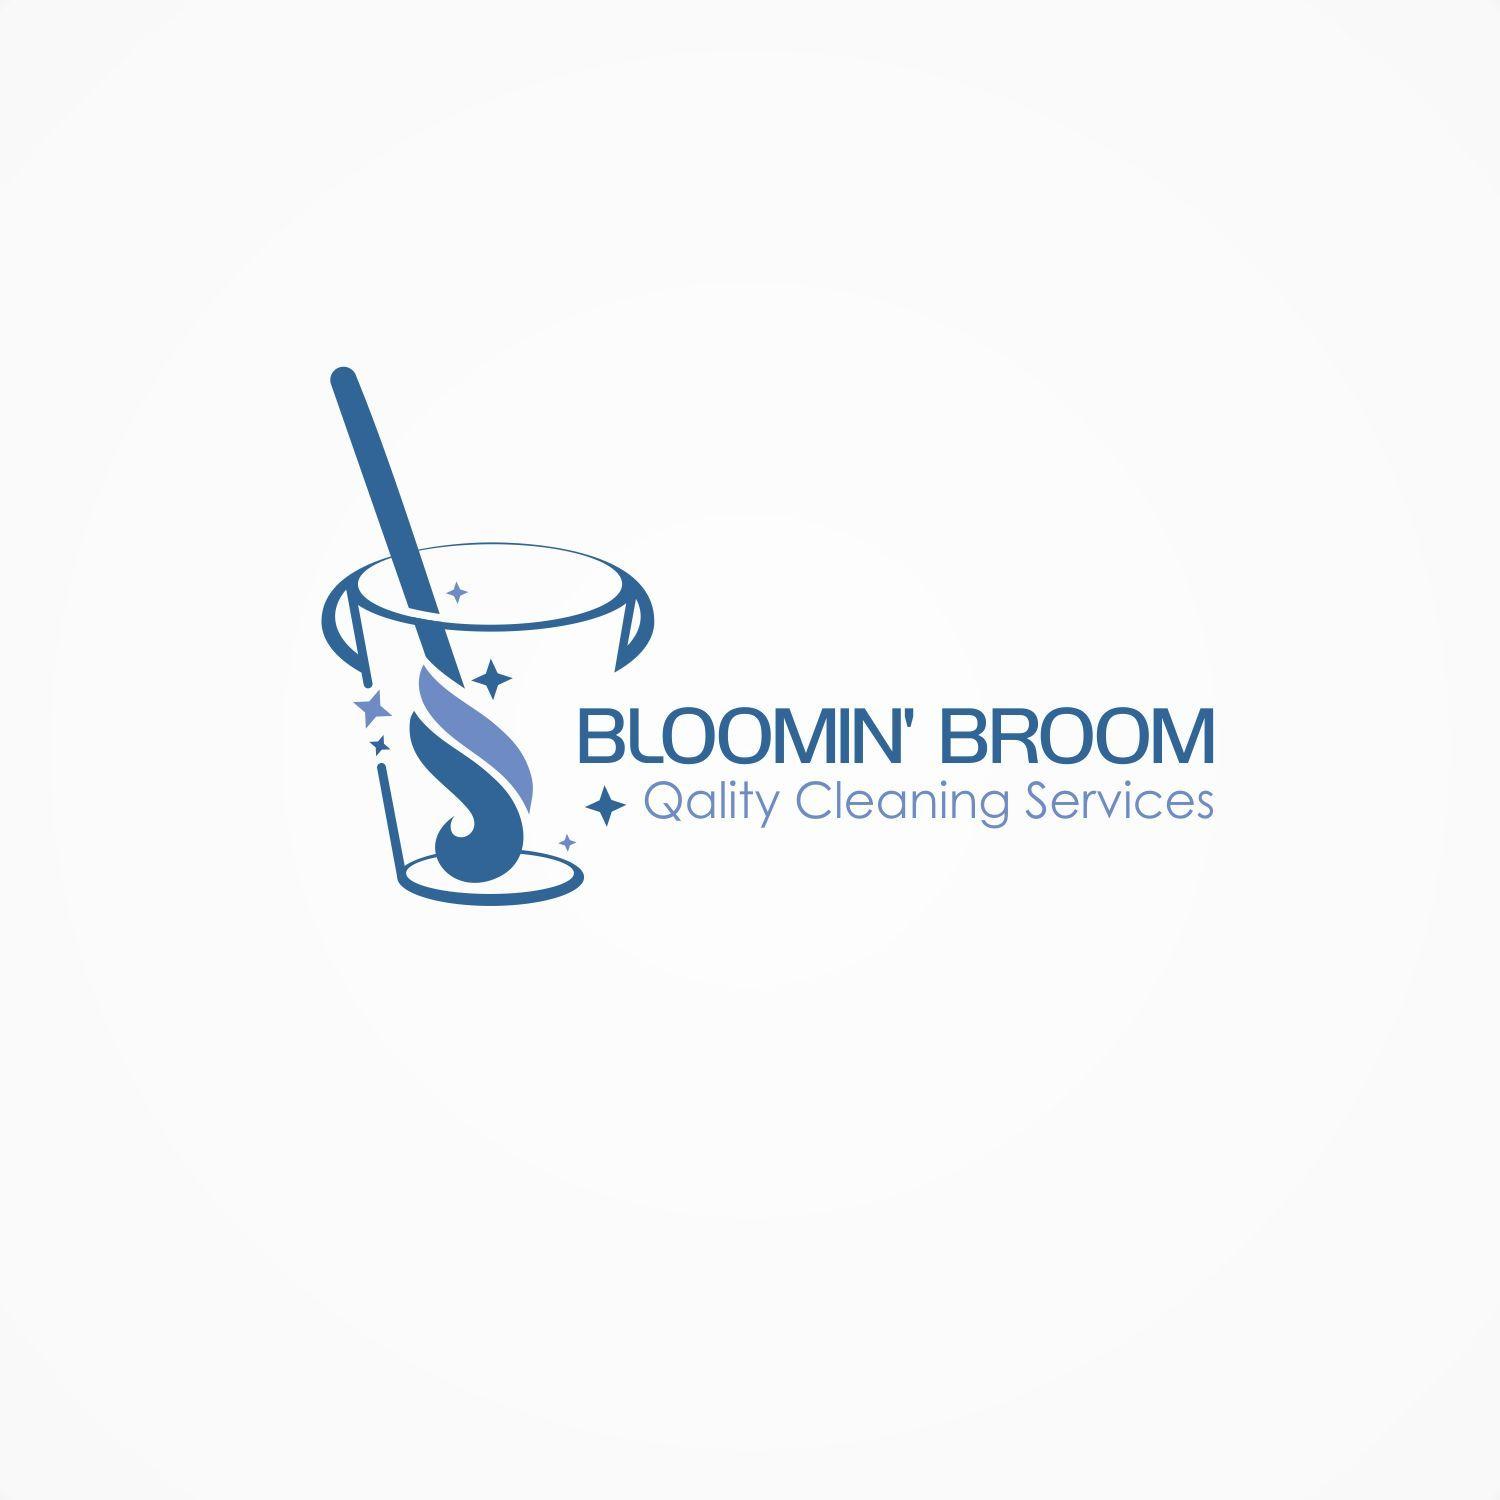 Broom Logo - Bold, Modern, House Cleaning Logo Design for BLOOMIN' BROOM Quality ...